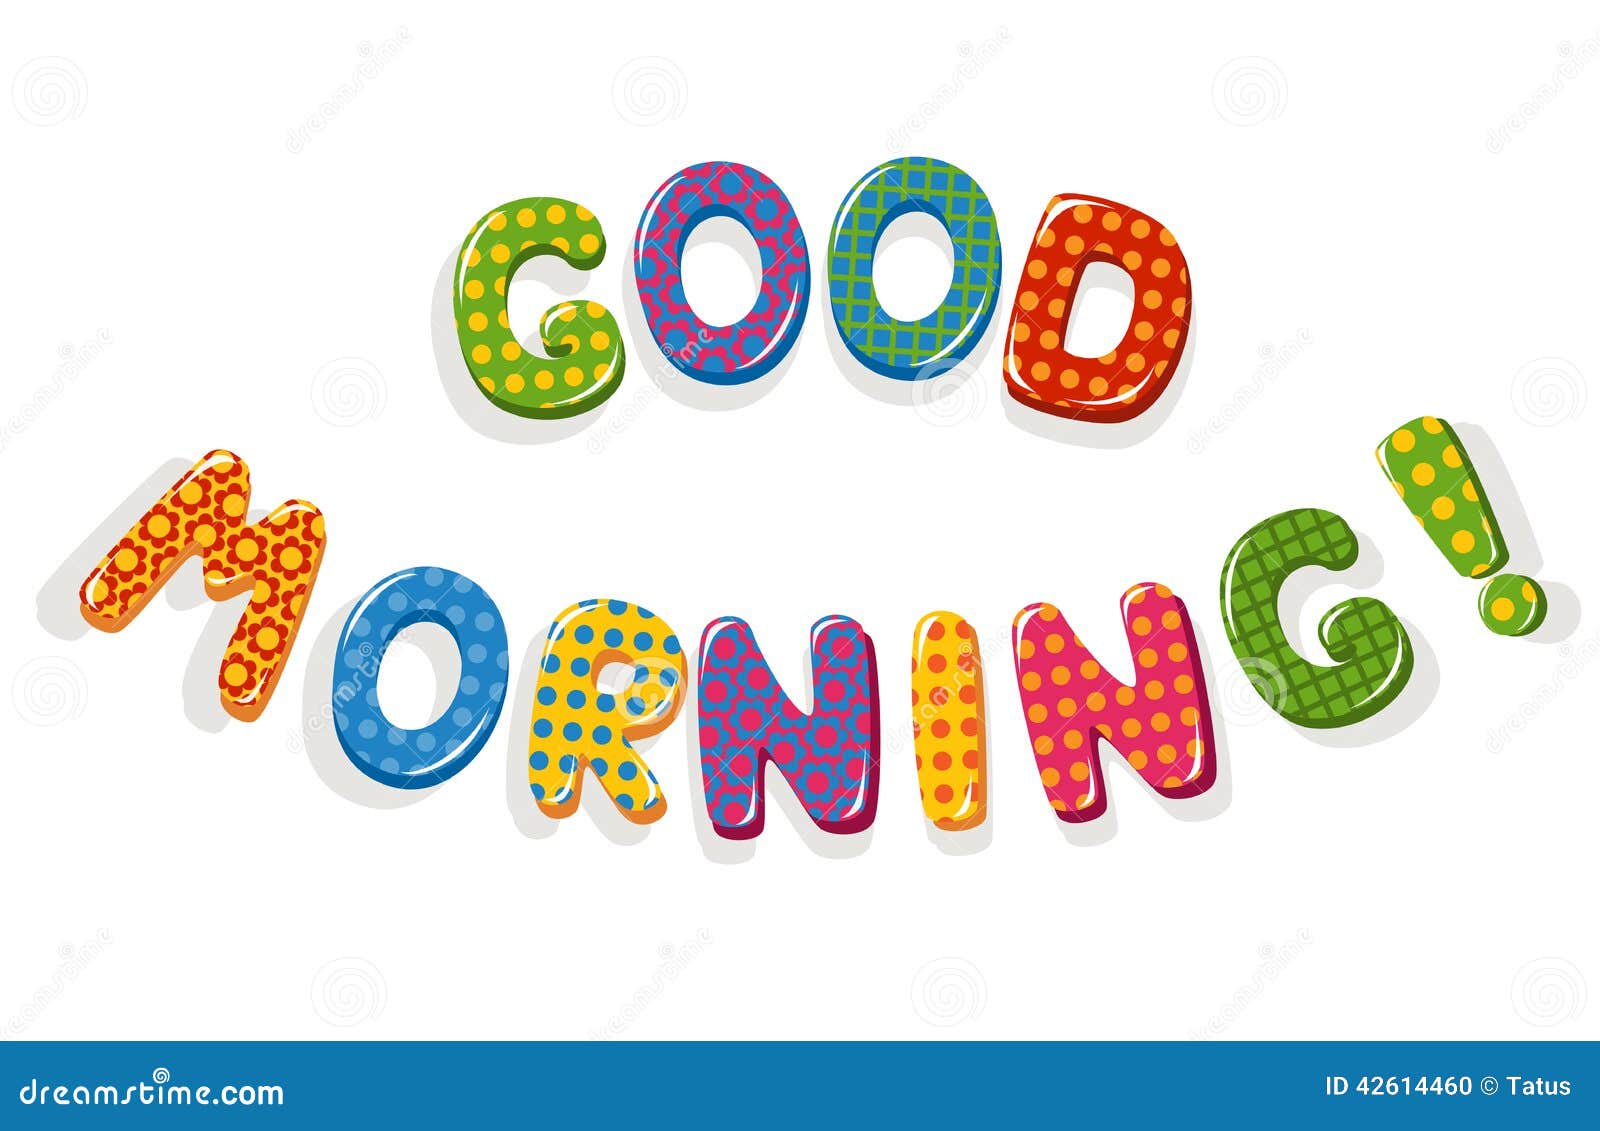 clipart for good morning - photo #29